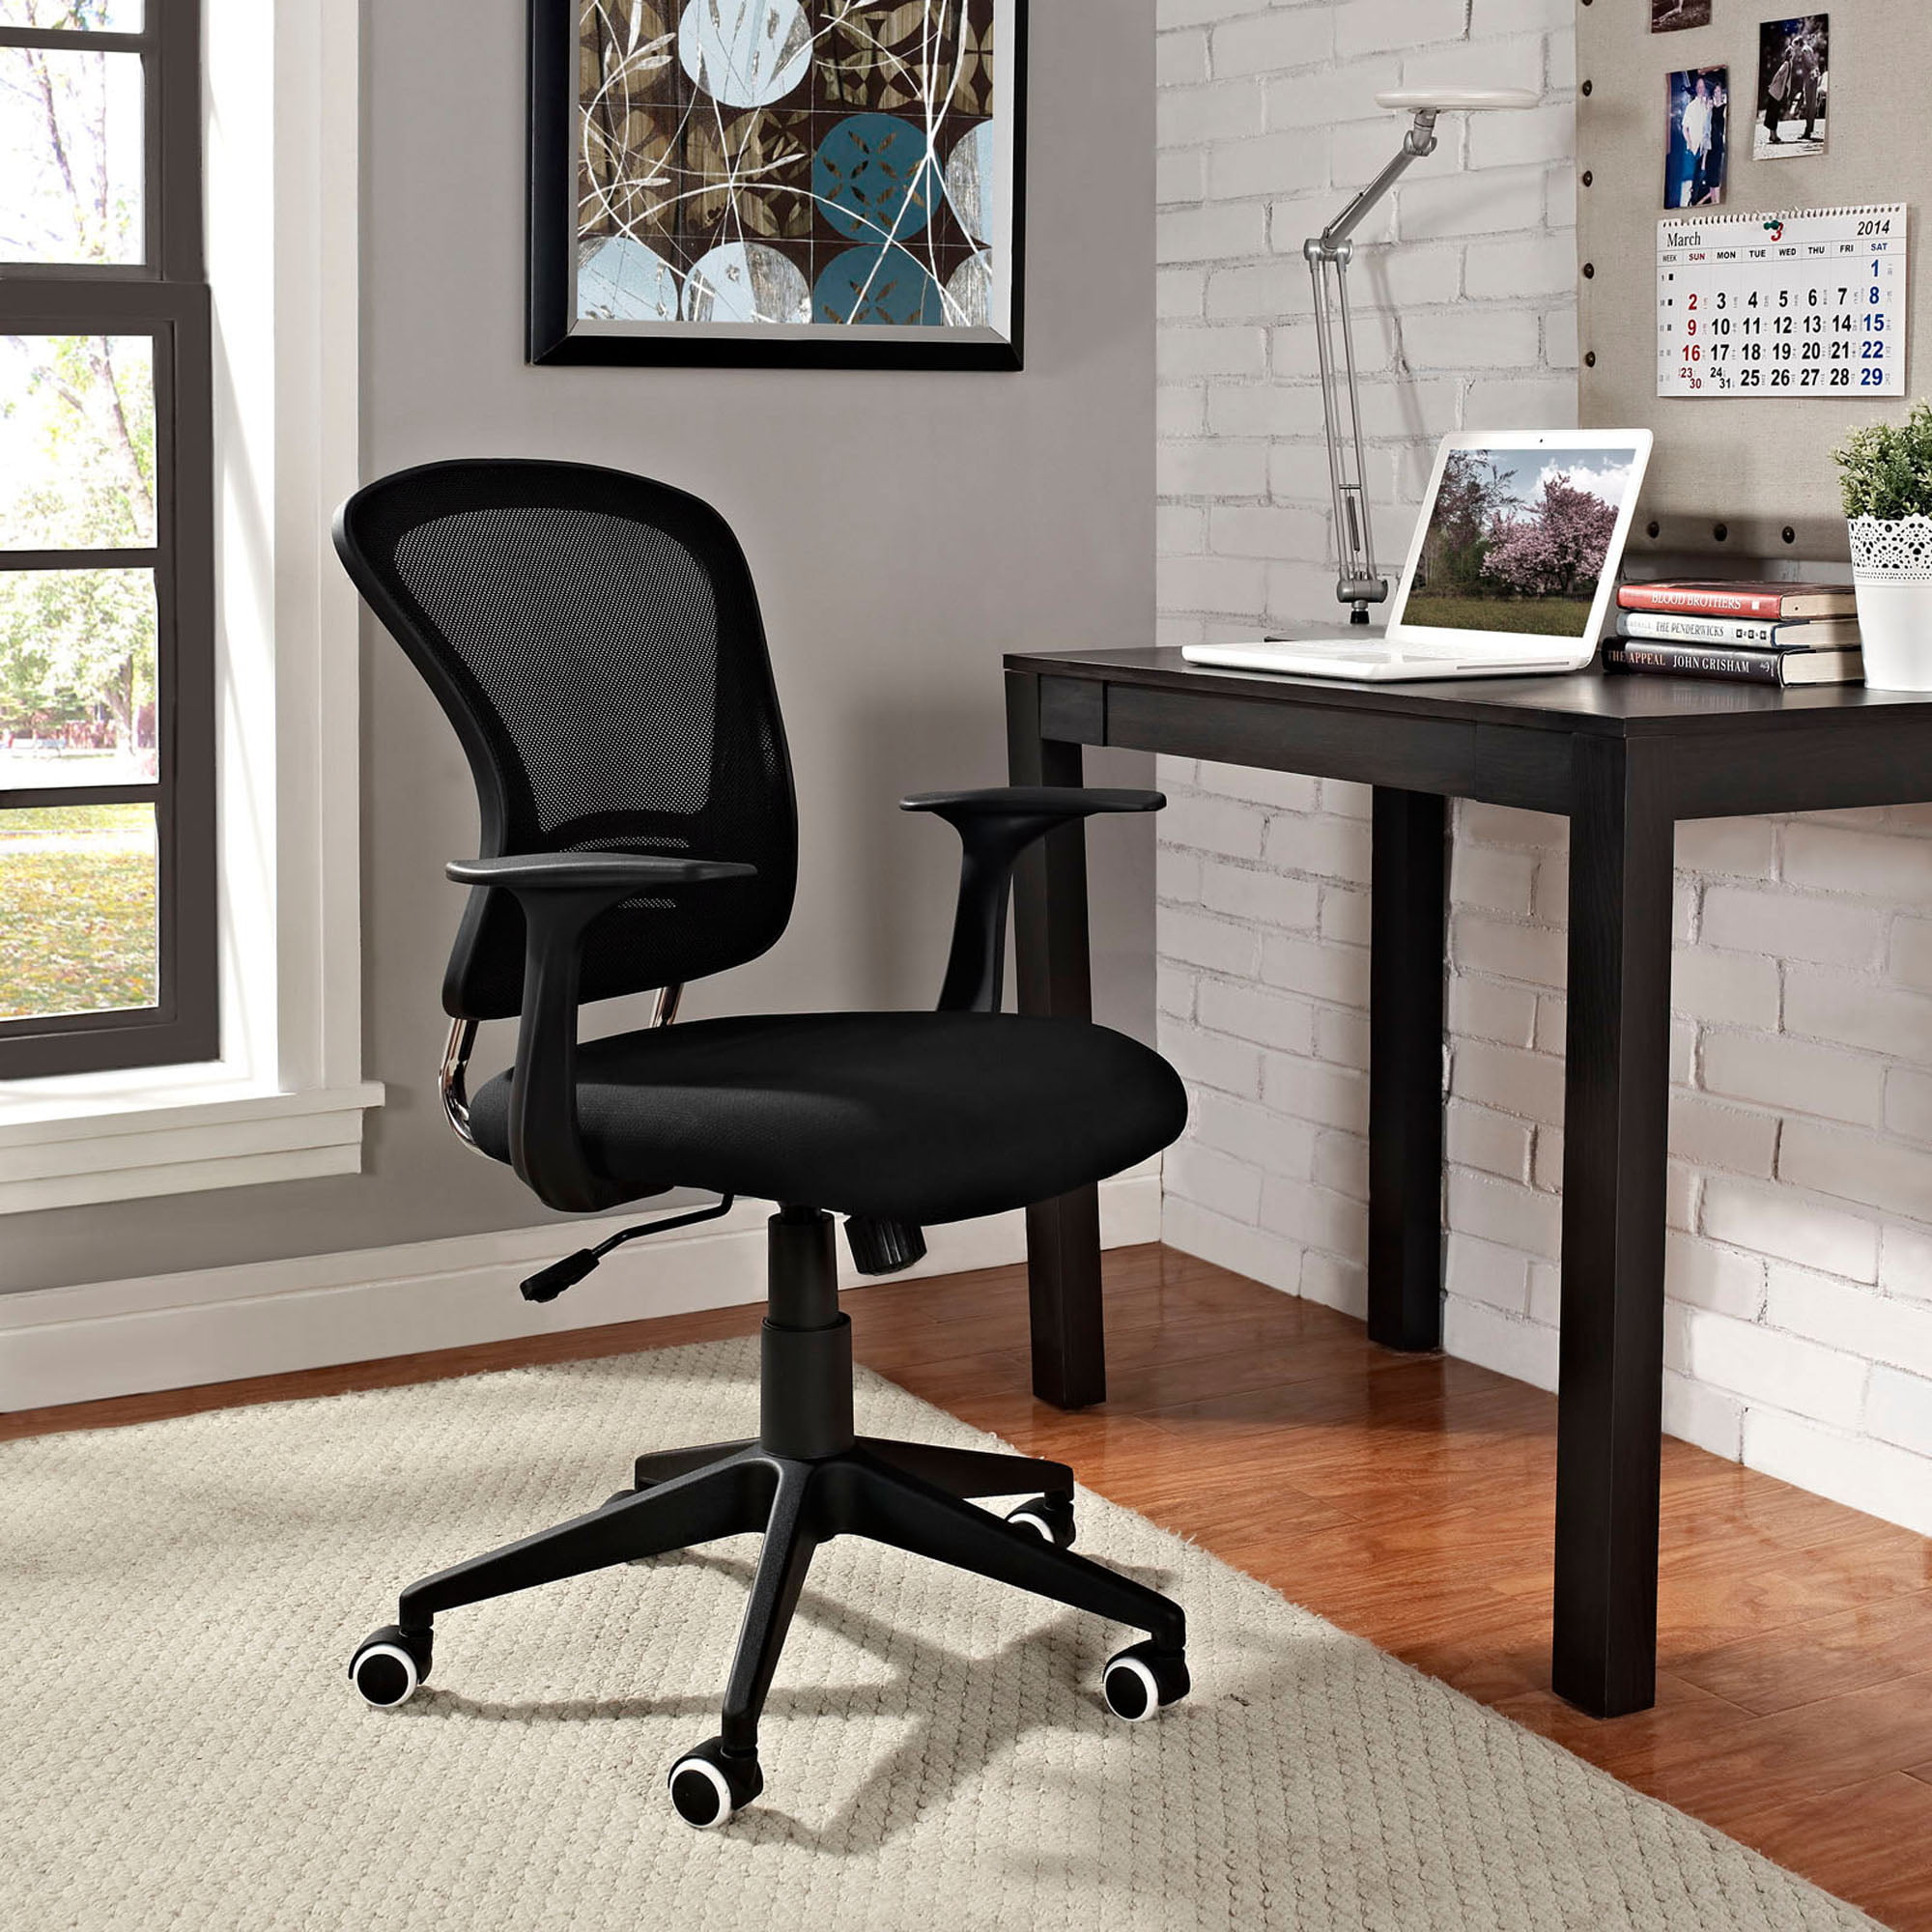 Modway Poise Mesh Back Office Chair with Mesh Padded Seat in Black